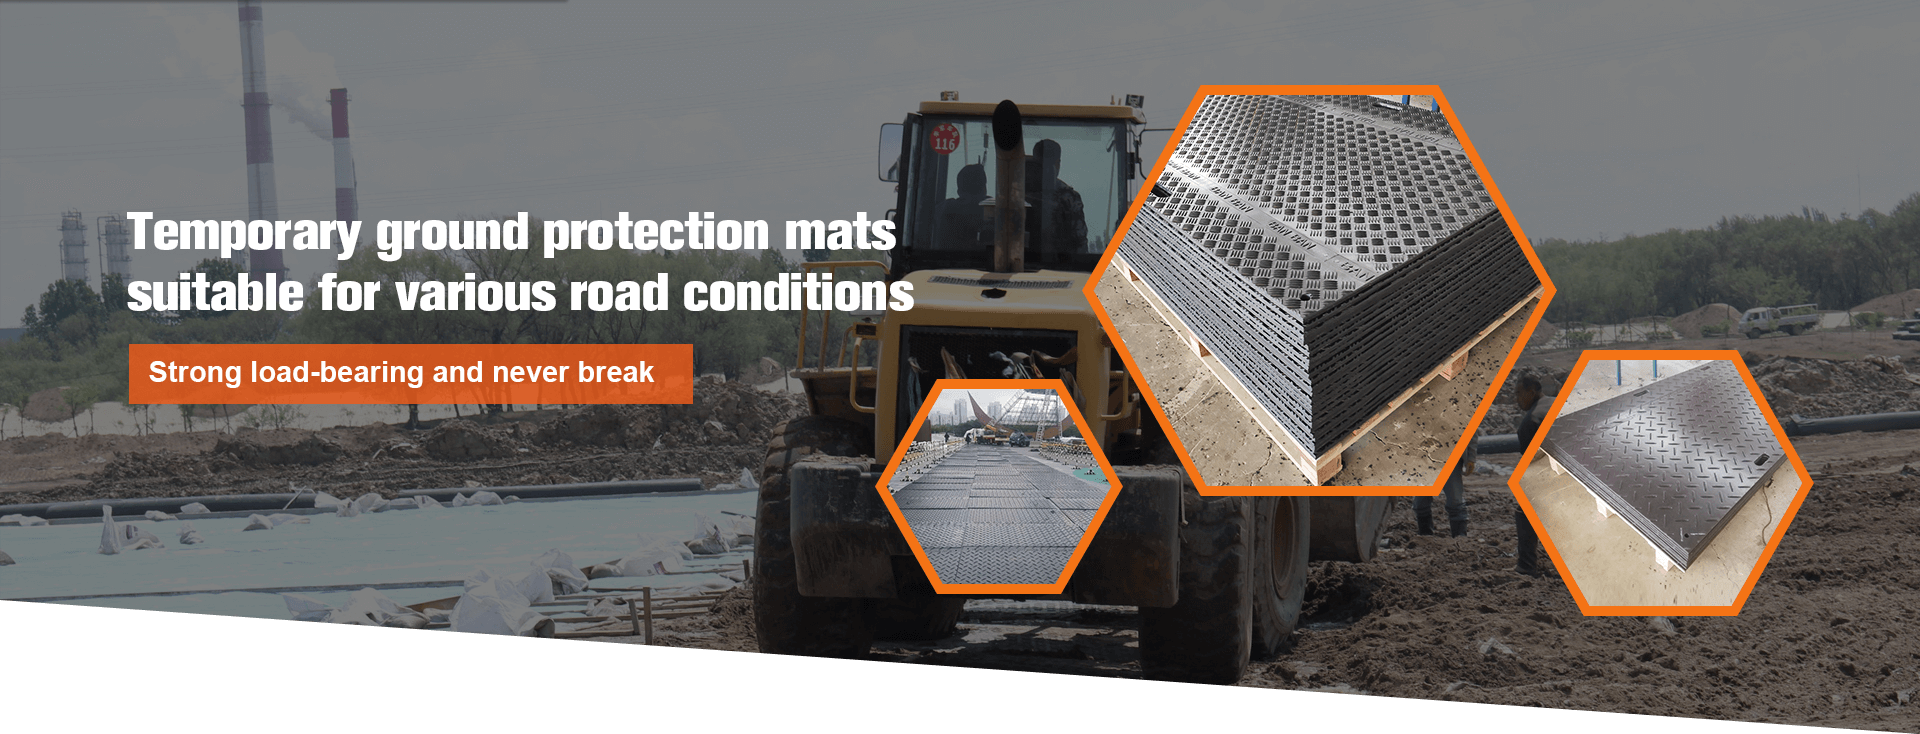 Temporary ground protection mats suitable for various road conditions